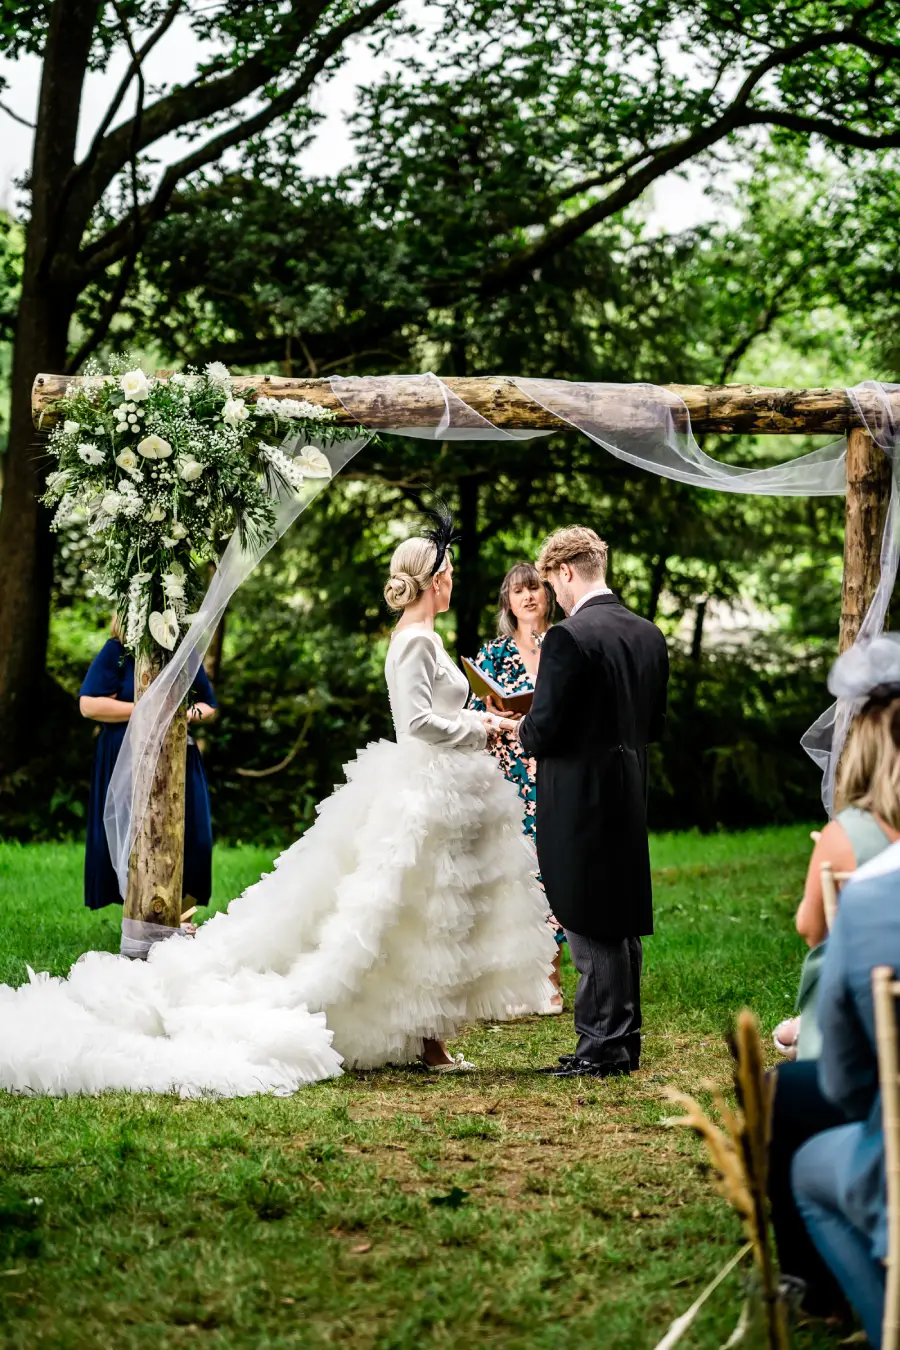 A bride and groom standing under a bespoke wooden arch at a humanist wedding officiated by Gower Celebrant.